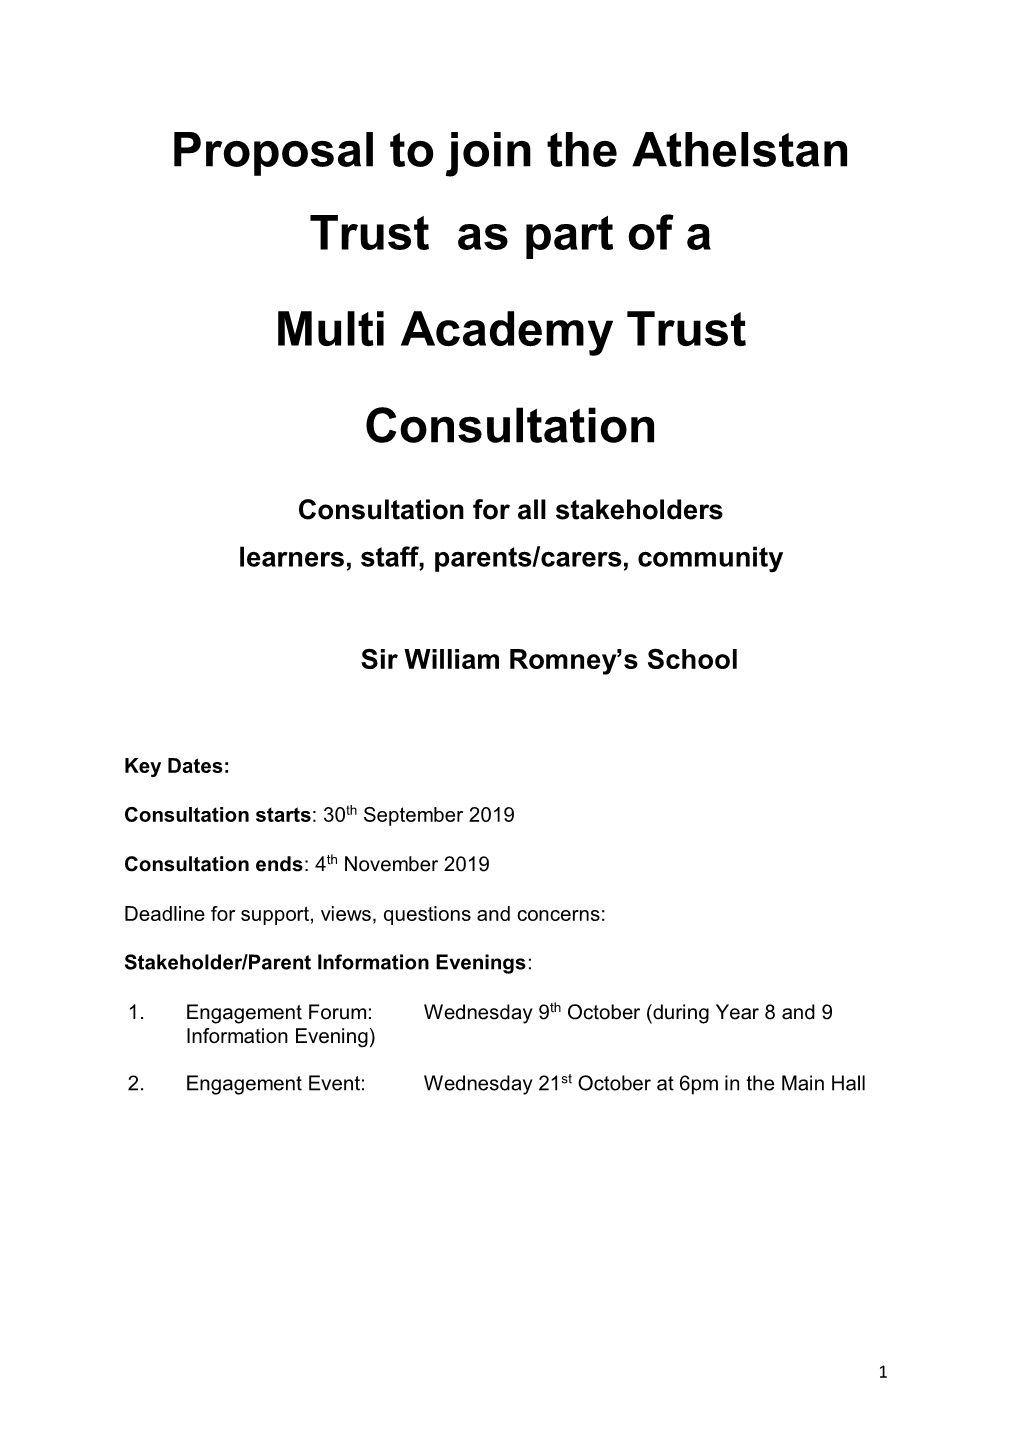 Proposal to Join the Athelstan Trust As Part of a Multi Academy Trust